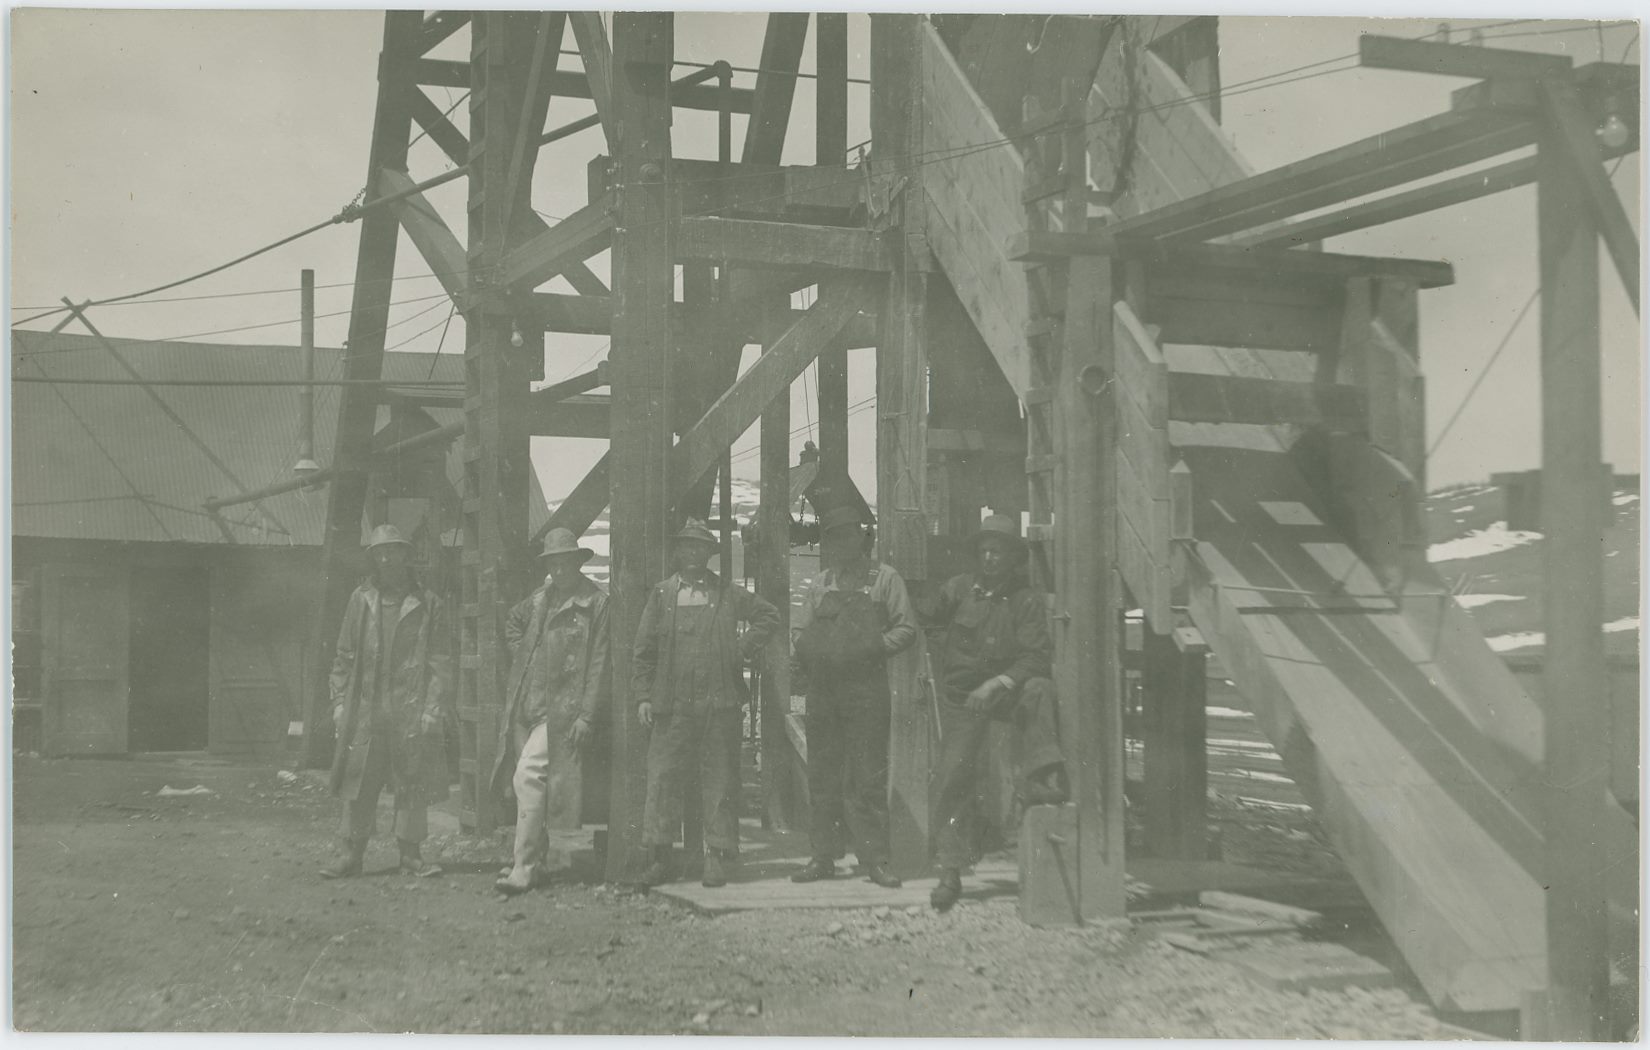 Another image I did not know where was at the time I bought it, but which I still wanted. And while I have this little bit uncertainty in me still, I do however strongly feel that this is at the Cameron Mine, where 5 men are posing for the photographer, standing in front of a Head-Frame, with the Hoist-House and shed type of structure in background left and a chute down from the Head-Frame in front right. I've seen a marked postcard with the same head-frame and hoist-house look as here, hence the strong feel this being the Cameron Mine, located in Cameron/Grassy Valley in the District.